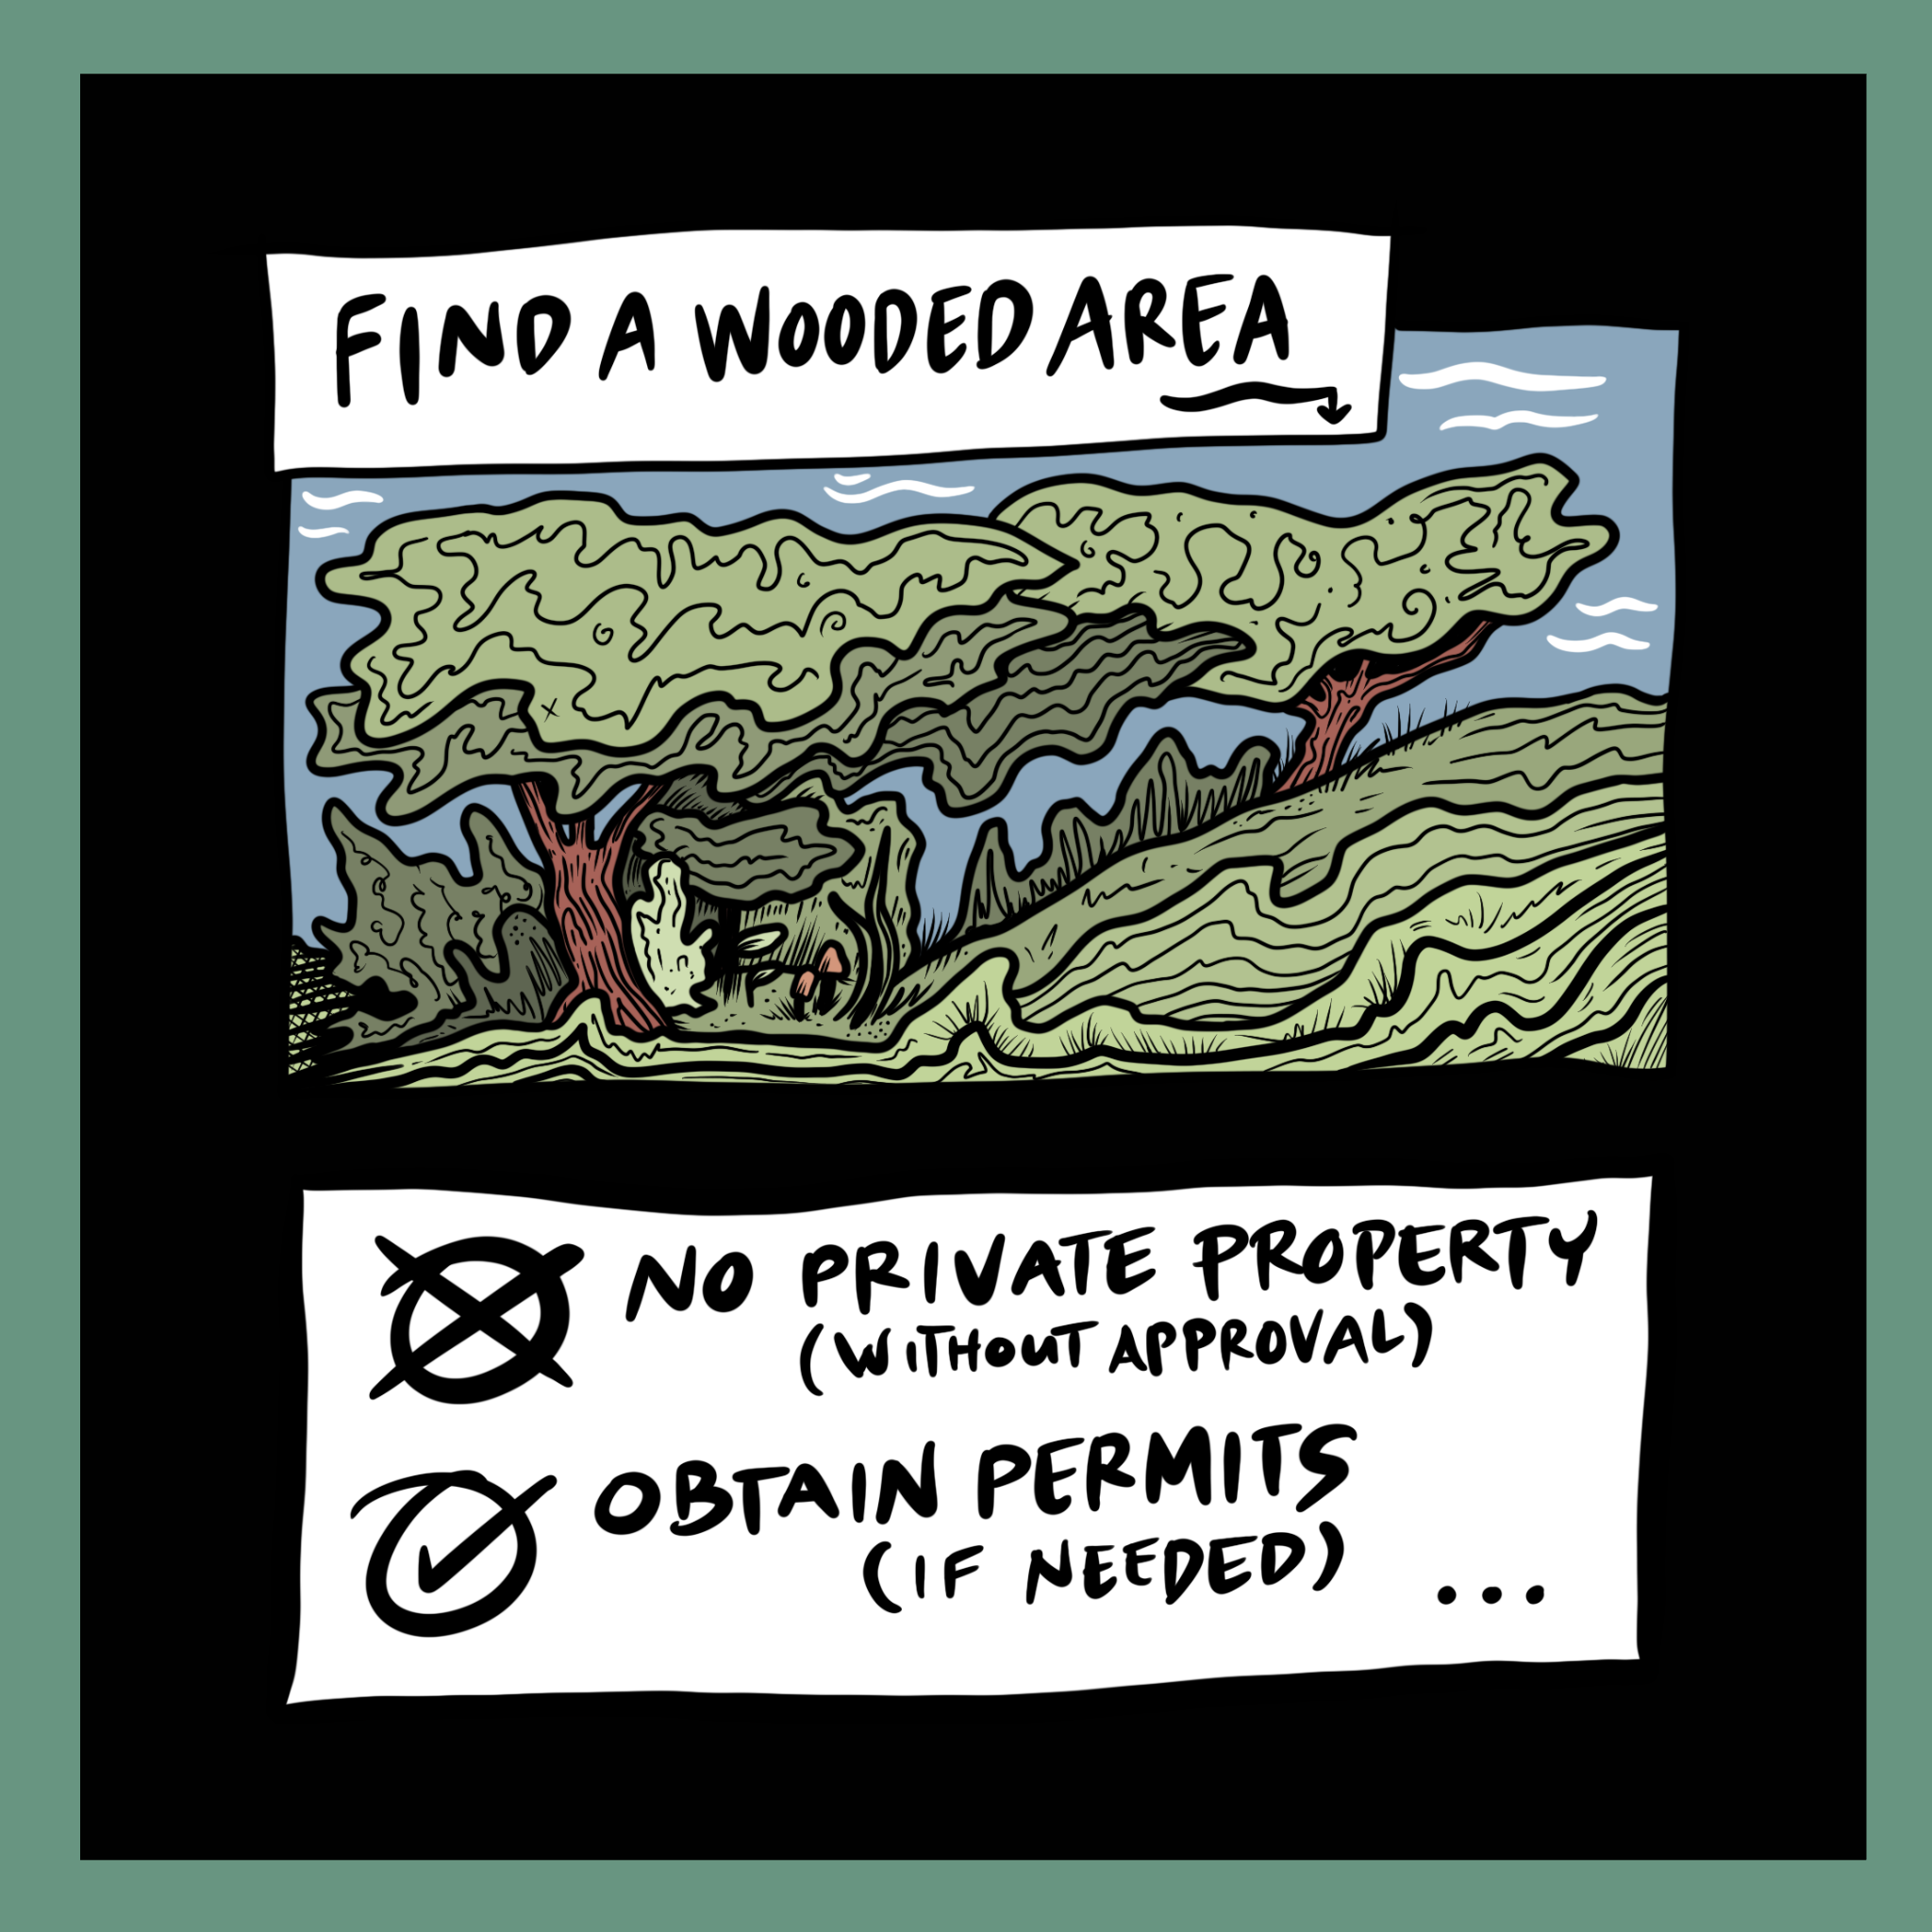 Find a wooded area. No private property (without approval). Obtain permits (if needed).